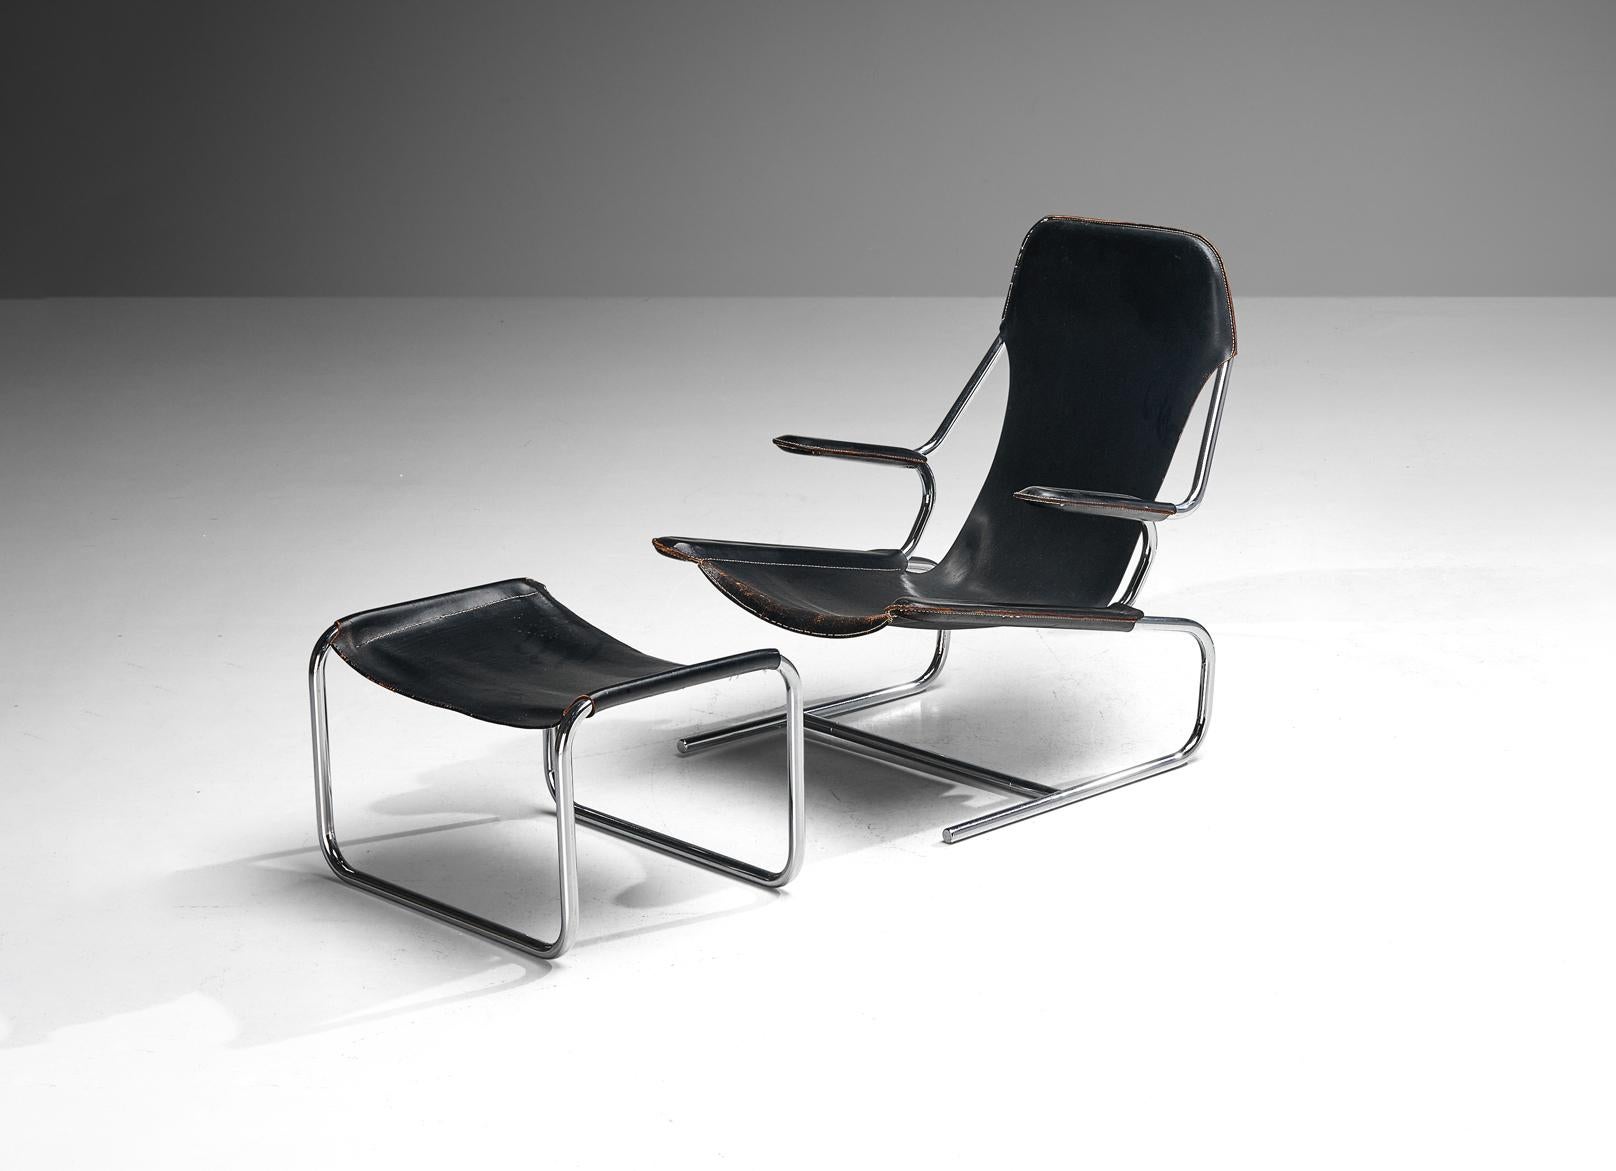 Armchair and ottoman in steel and leather, Europe, 1950s.

Modern tubular armchair and matching ottoman. These items are made of bent tubular steel with black saddle leather upholstery. Beautiful curved lines combine into a modern and clean design.